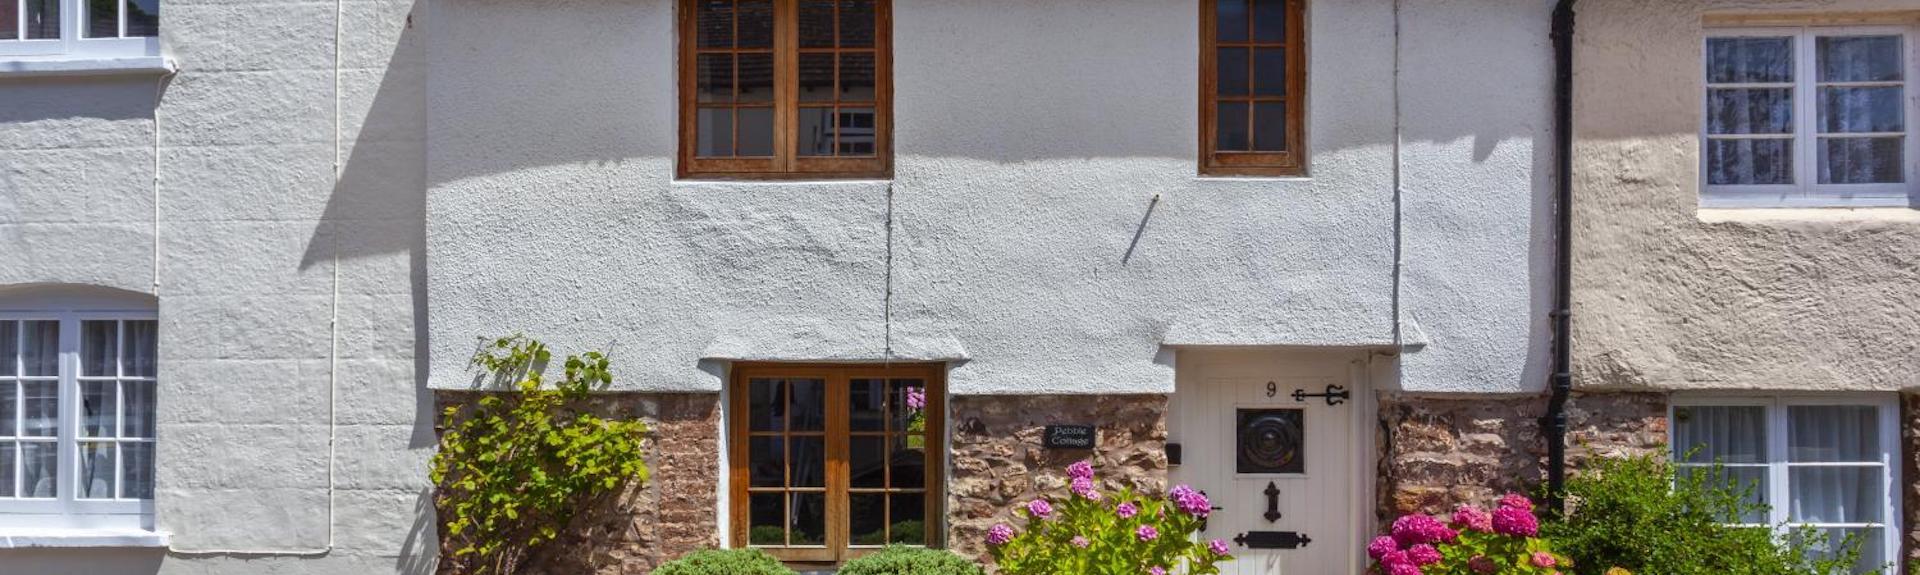 Exterior of a terraced stone-built holiday cottage in Dunster.